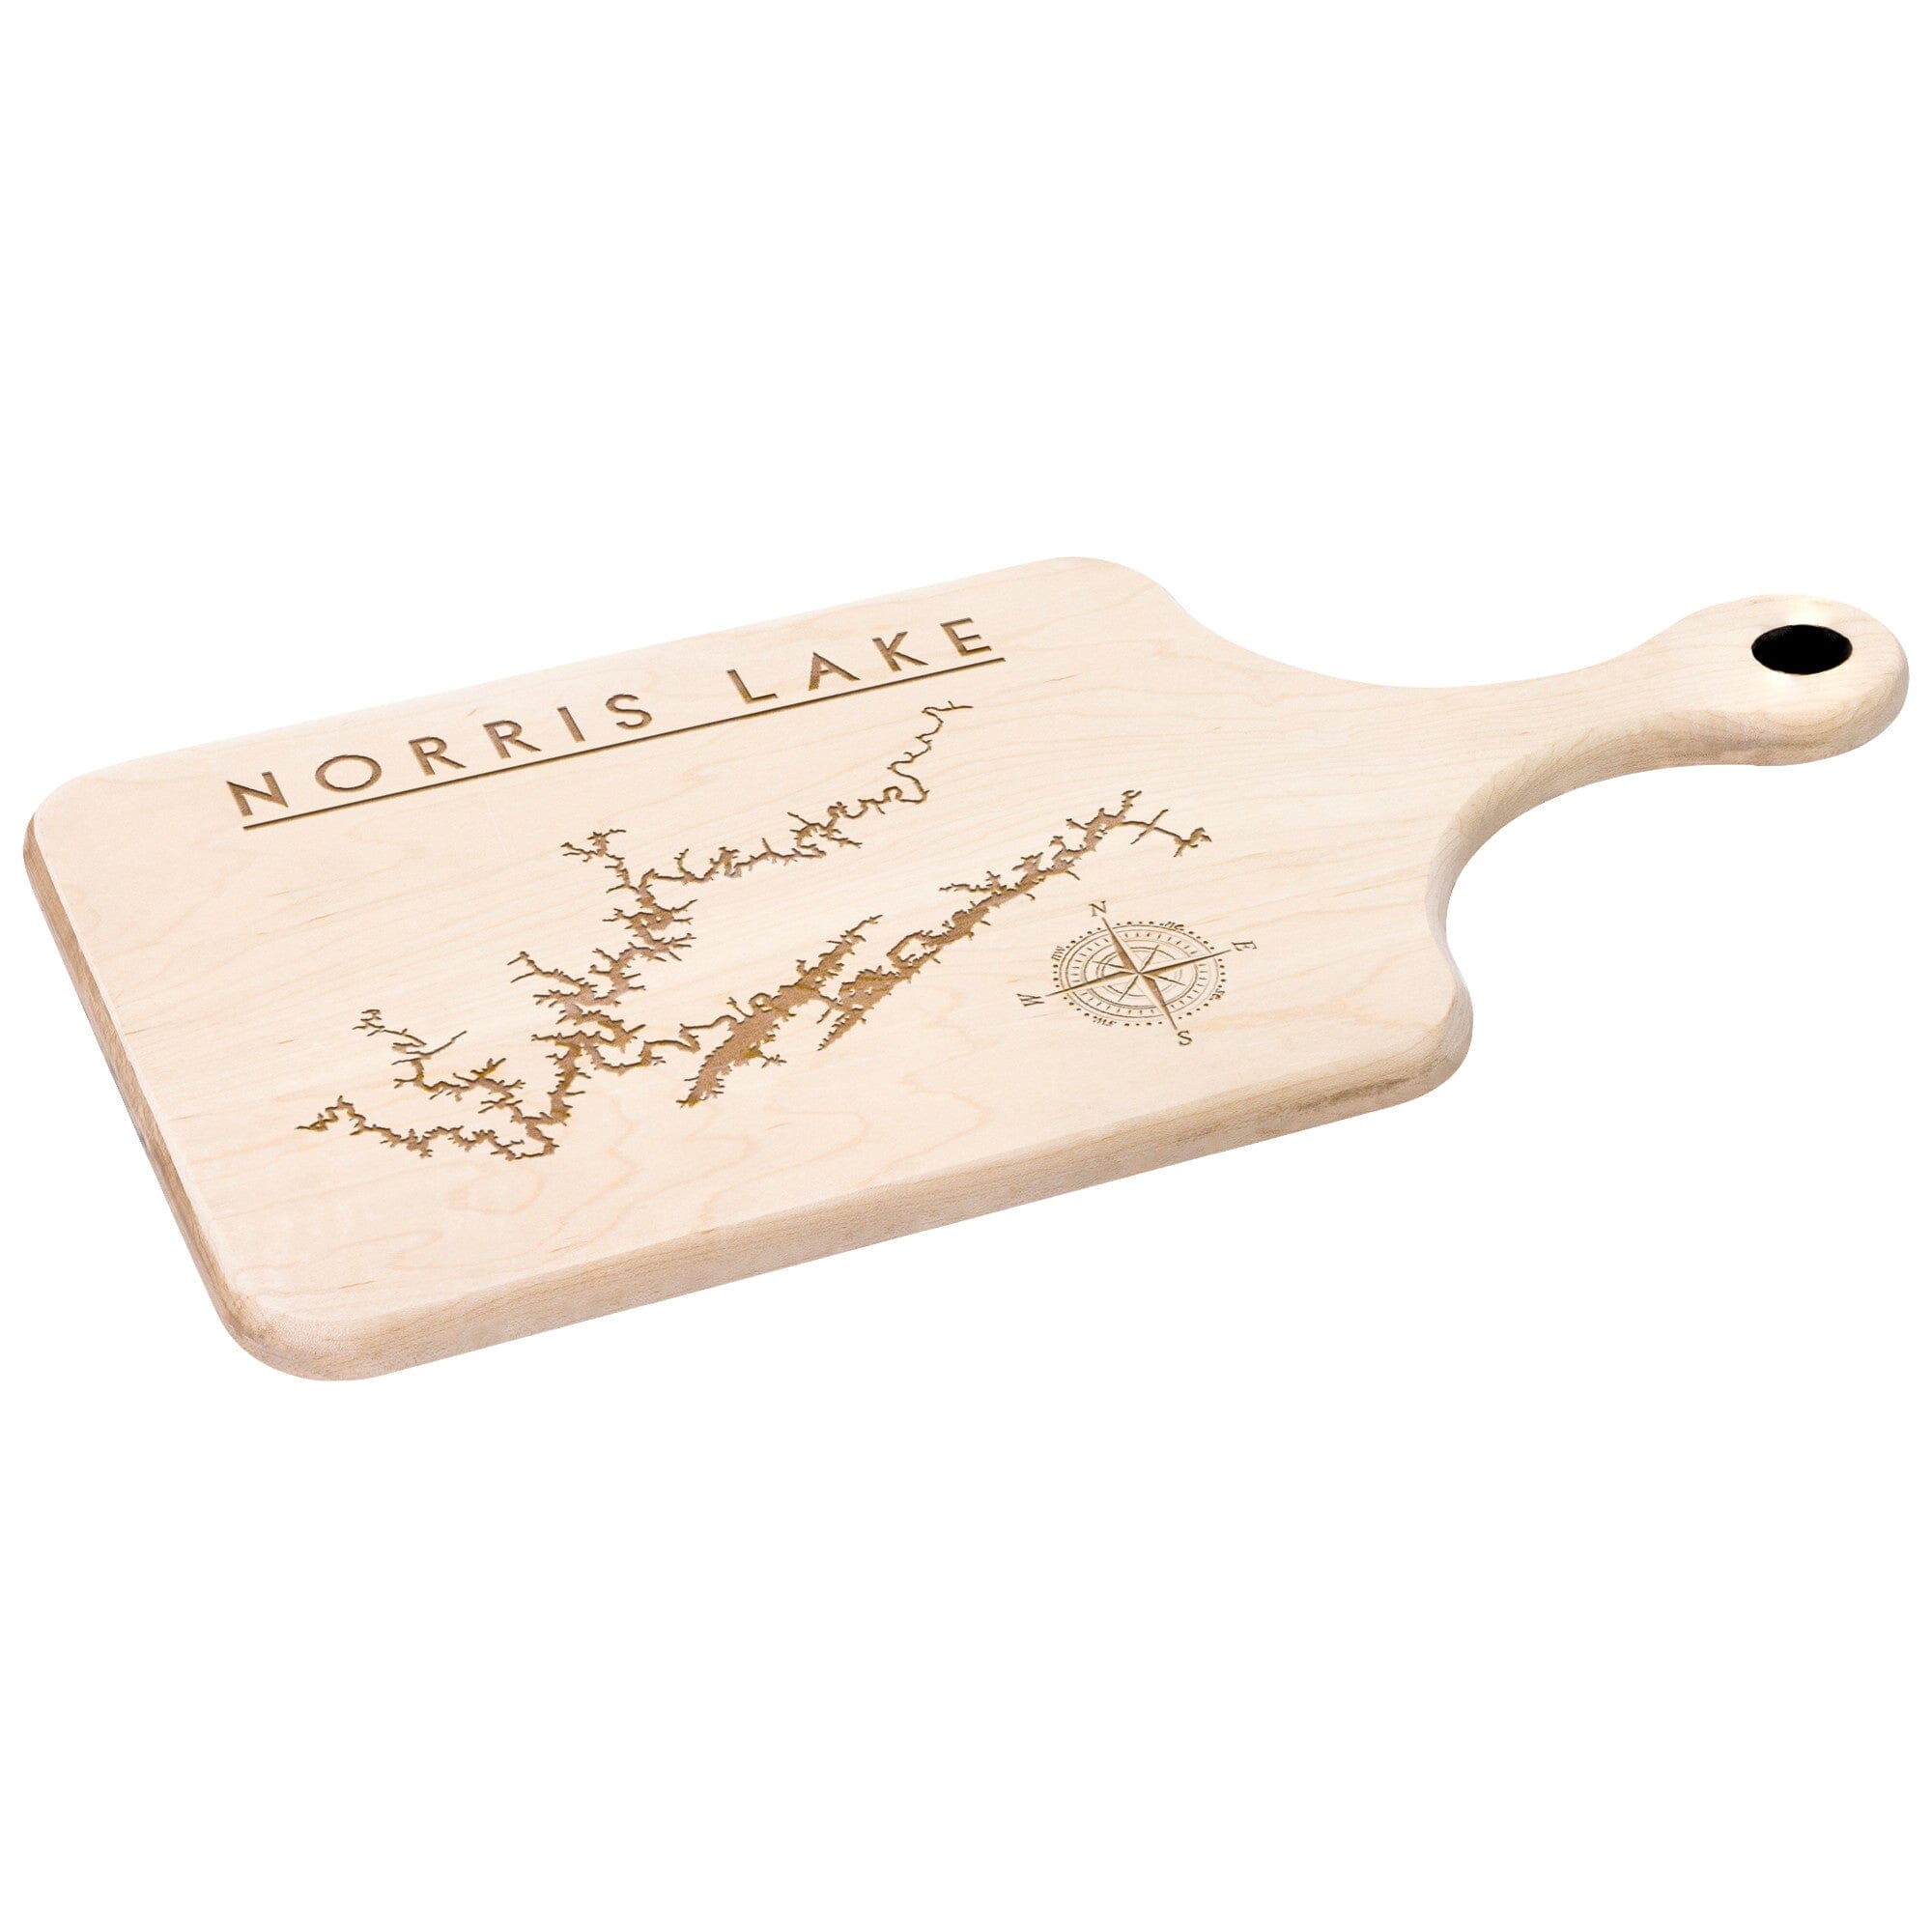 https://houseboatkings.com/cdn/shop/products/norris-lake-map-cutting-board-with-handle-laser-etched-lake-gift-wedding-gift-christmas-gift-for-boaters-chef-gift-gift-for-him-gift-for-hermaple-and-walnut-cutting-board-166602.jpg?v=1692996309